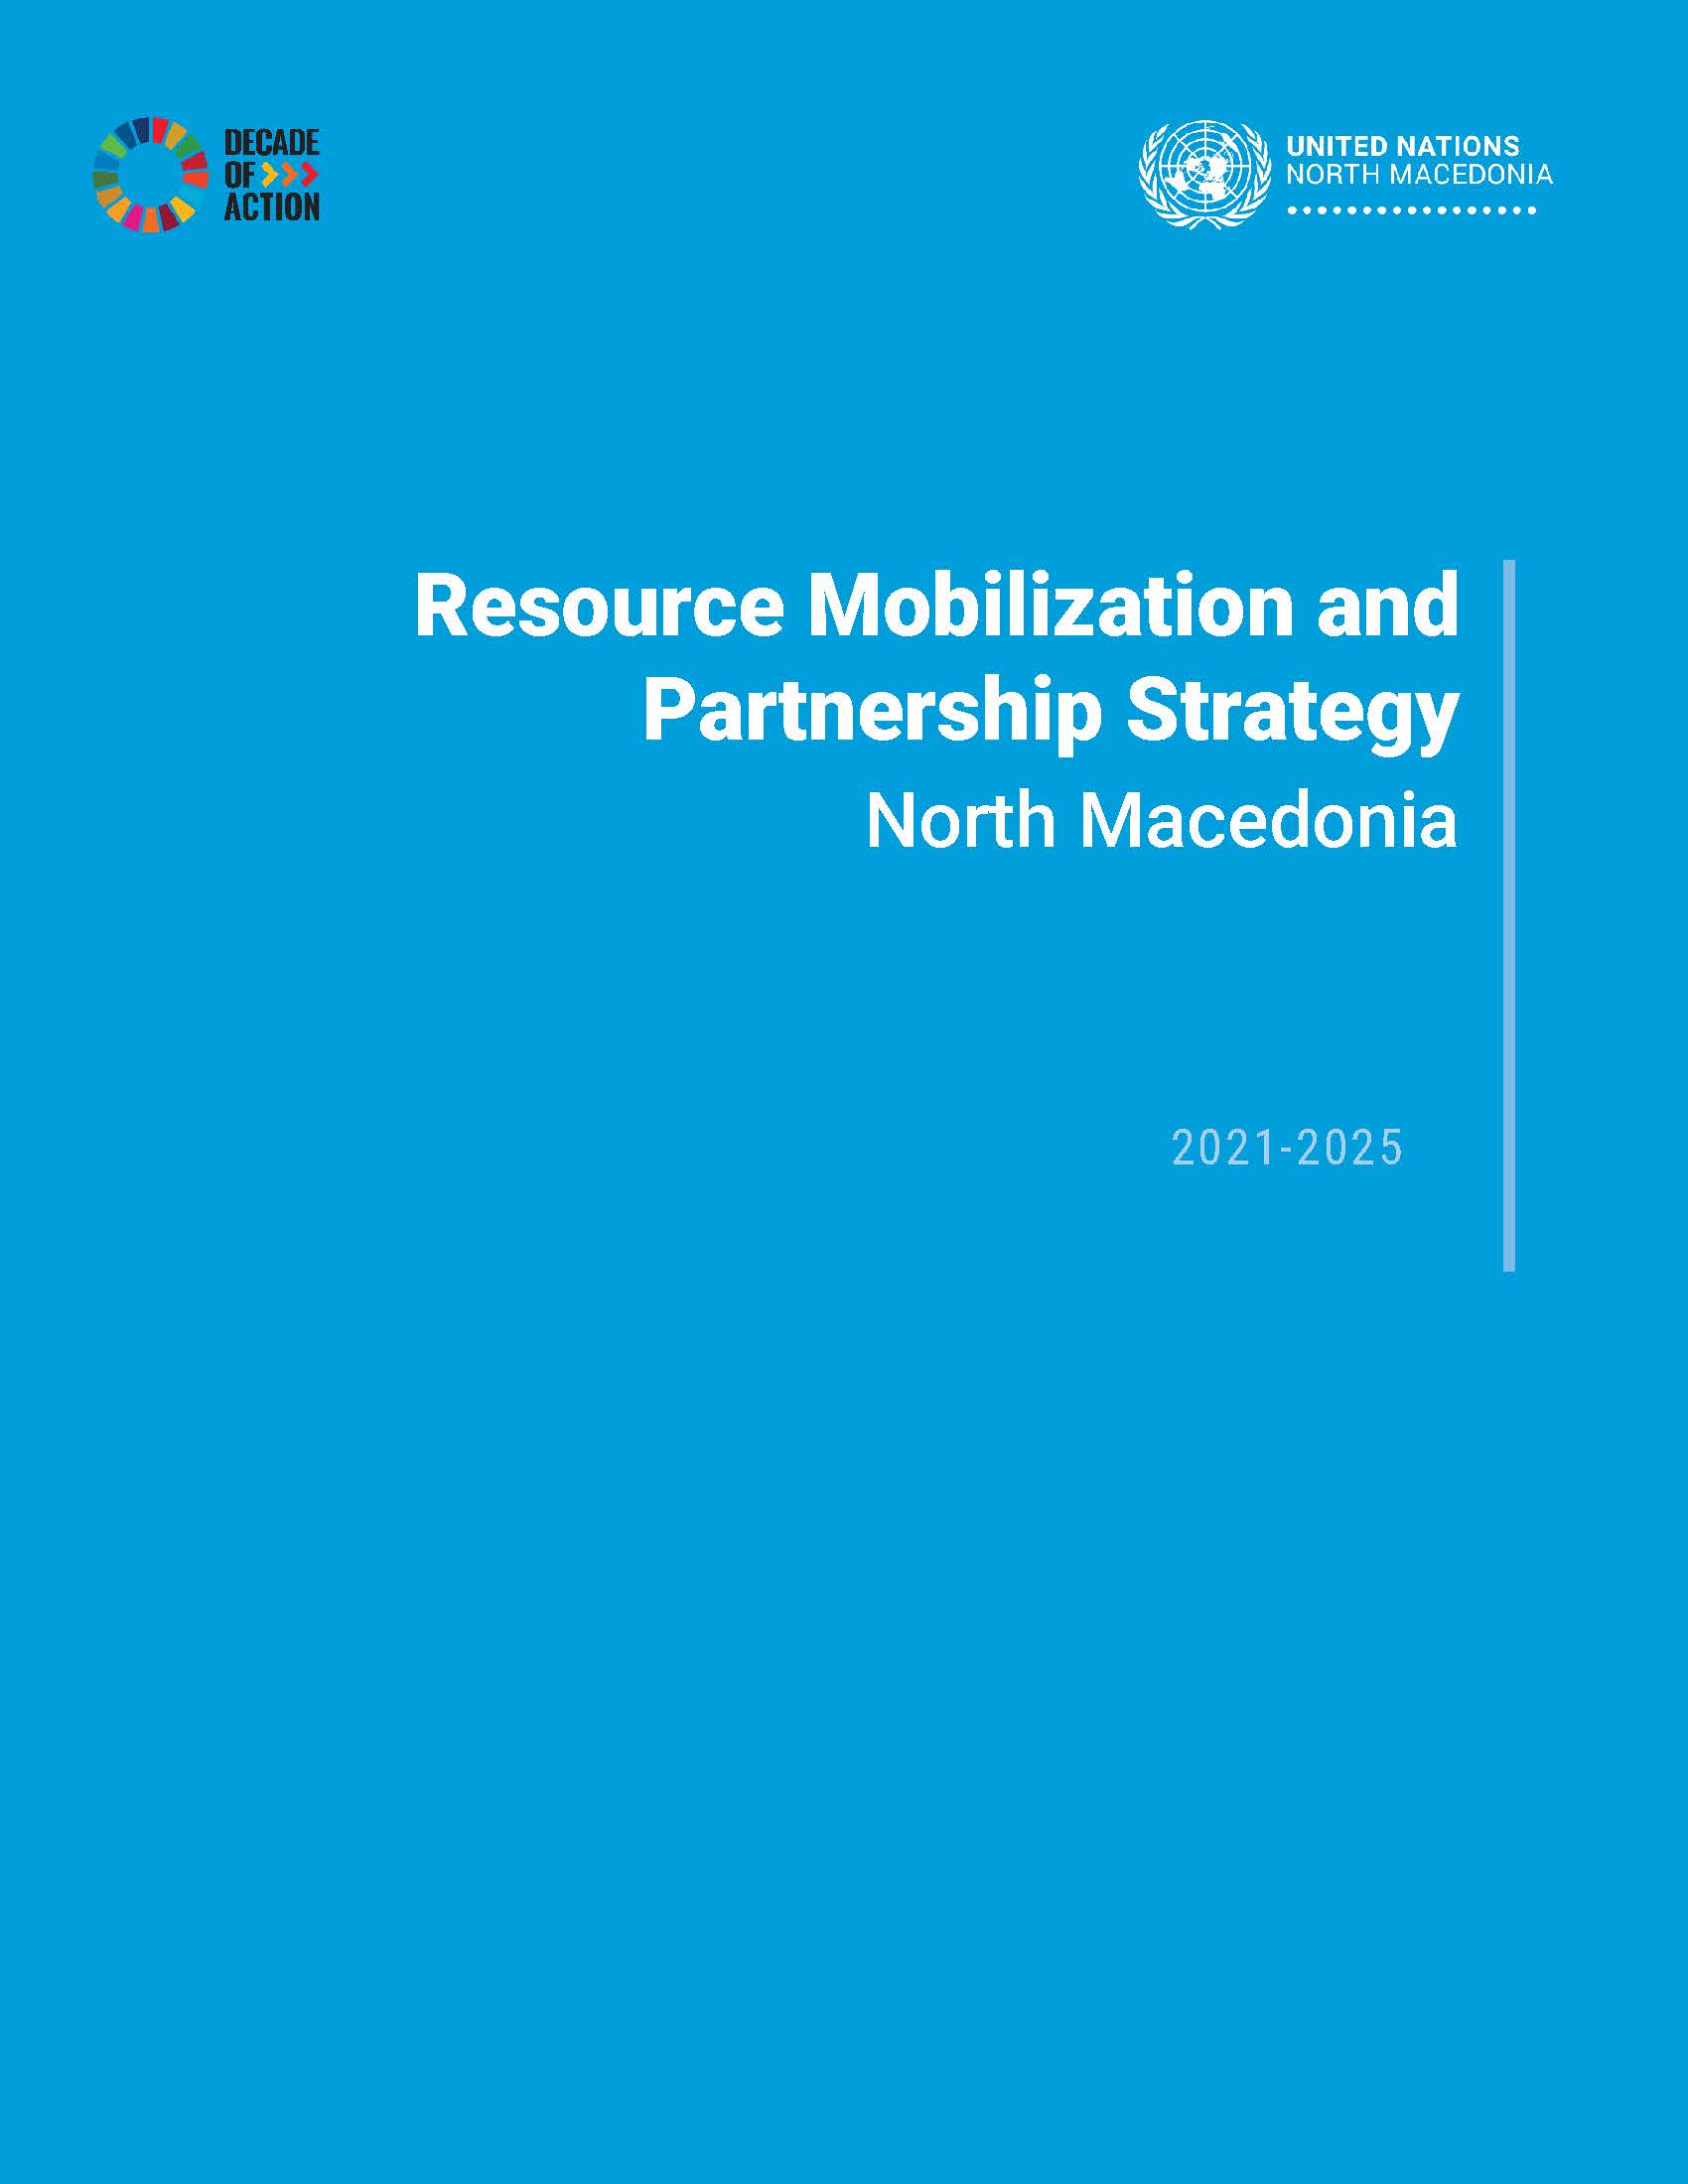 Resource Mobilization and Partnership Strategy North Macedonia